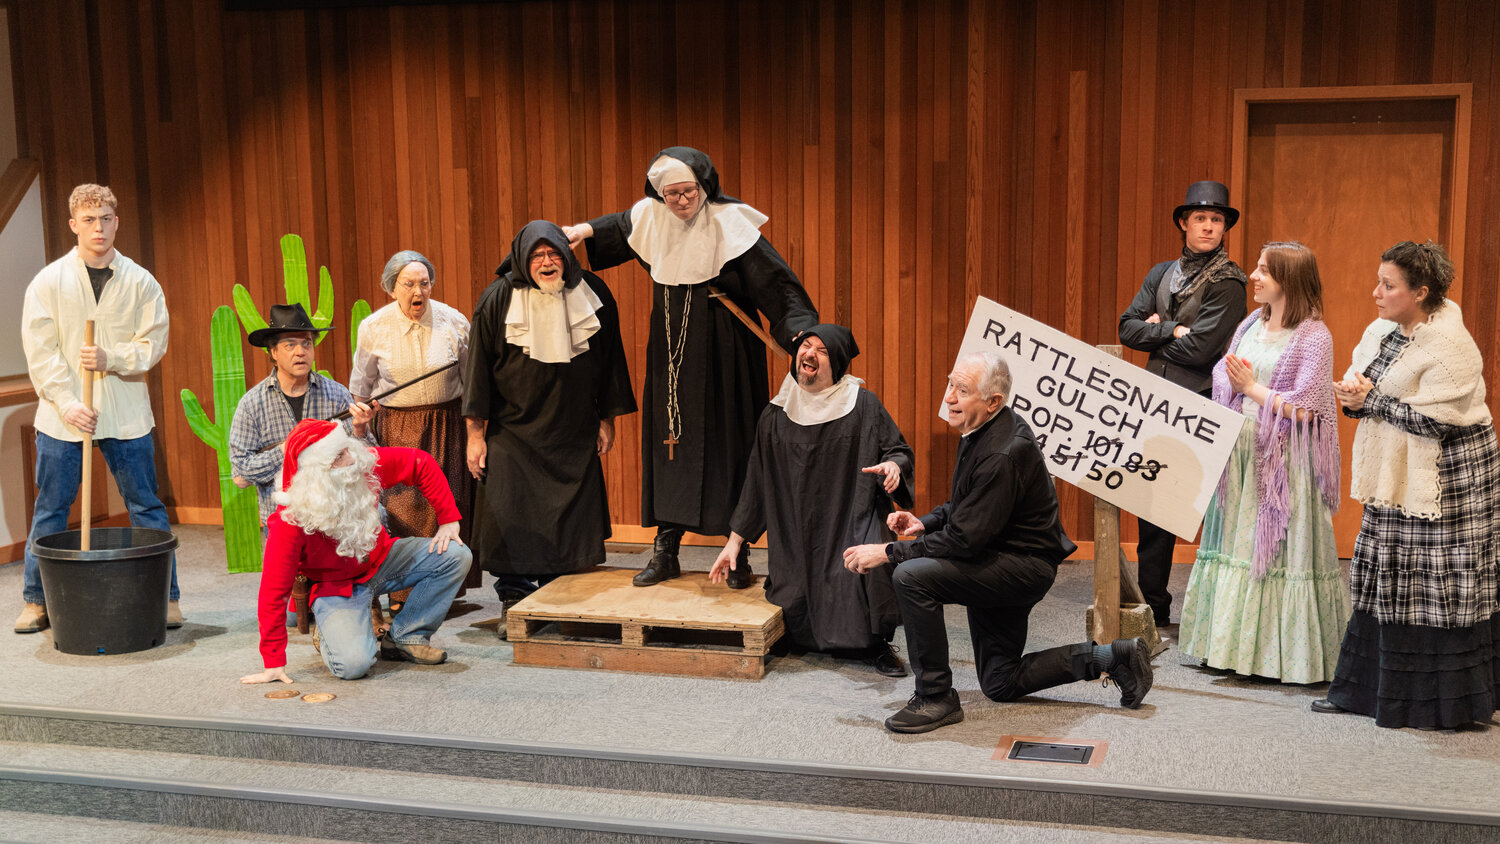 From left, Joseph Caserta as Big Hank, Dale Bradrick as Roscoe, Kevin Caserta as Old Frank, Kay Morton as Louise Binder, Randy Humphreys as Hector Bogonzoles, Gloria Wilcox as Sister Perpetua, Alex Johnson as Jake Headley, Mark Johnson as Reverend Fred Binder, Sam Mittge as Mayor Thomas Percifield, Elise Caserta as Hildegard Percifield and Neli VonWald as Jane Binder perform on stage during dress rehearsals for the Christmas at Rattlesnake Gulch play at Mountain View Baptist Church in Centralia.